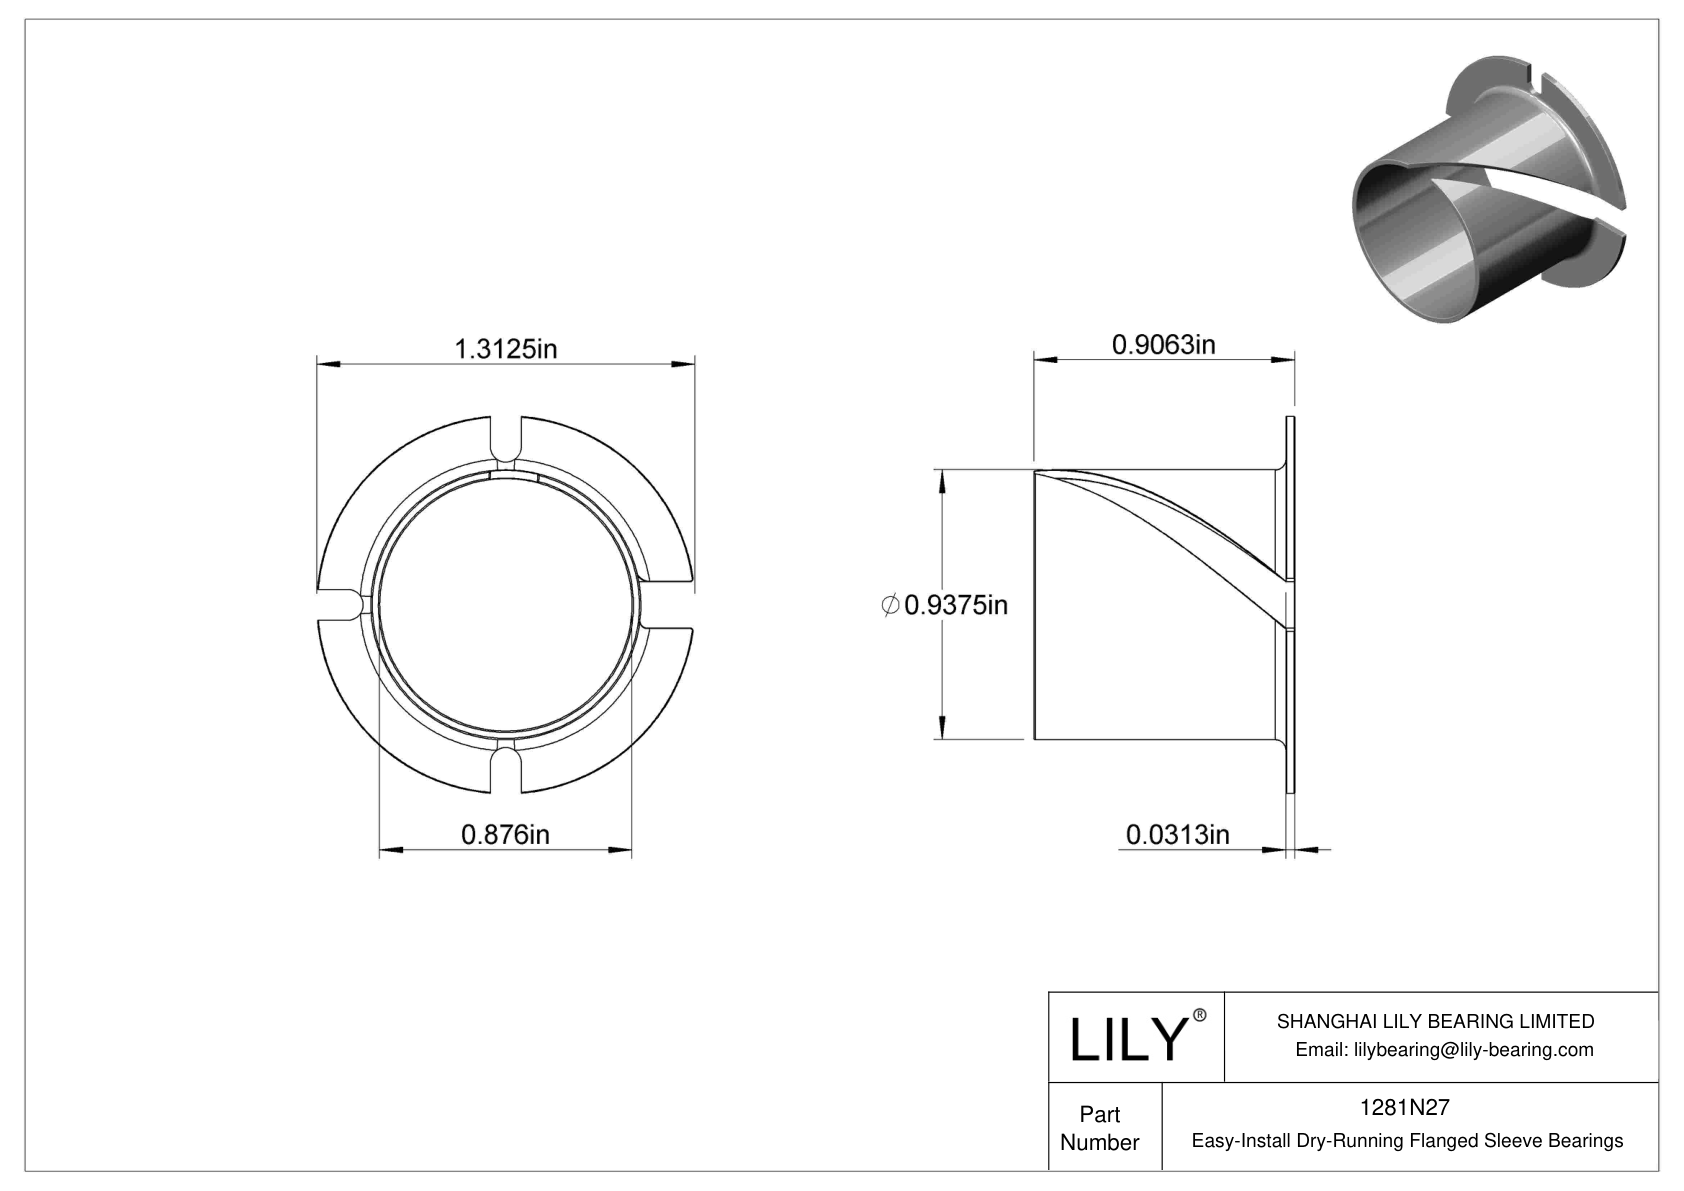 BCIBNCH Easy-Install Dry-Running Flanged Sleeve Bearings cad drawing